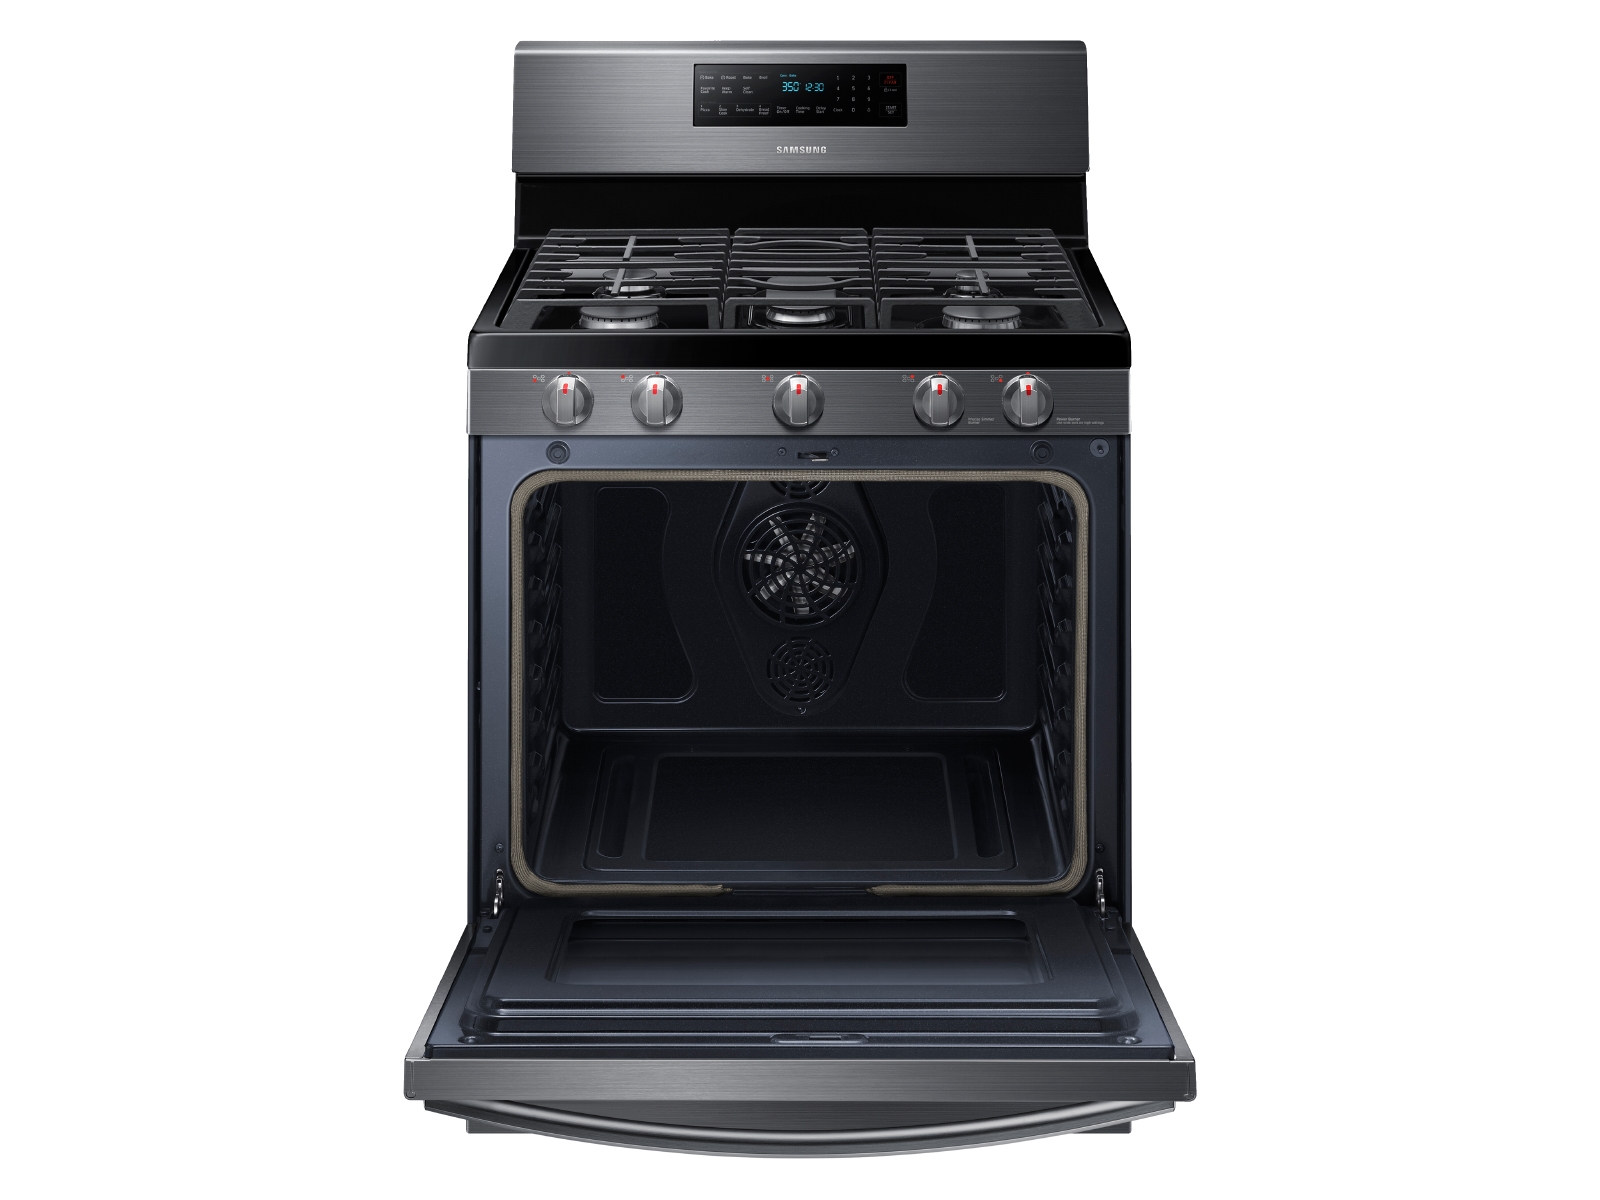 Thumbnail image of 5.8 cu. ft. Freestanding Gas Range with Convection in Black Stainless Steel